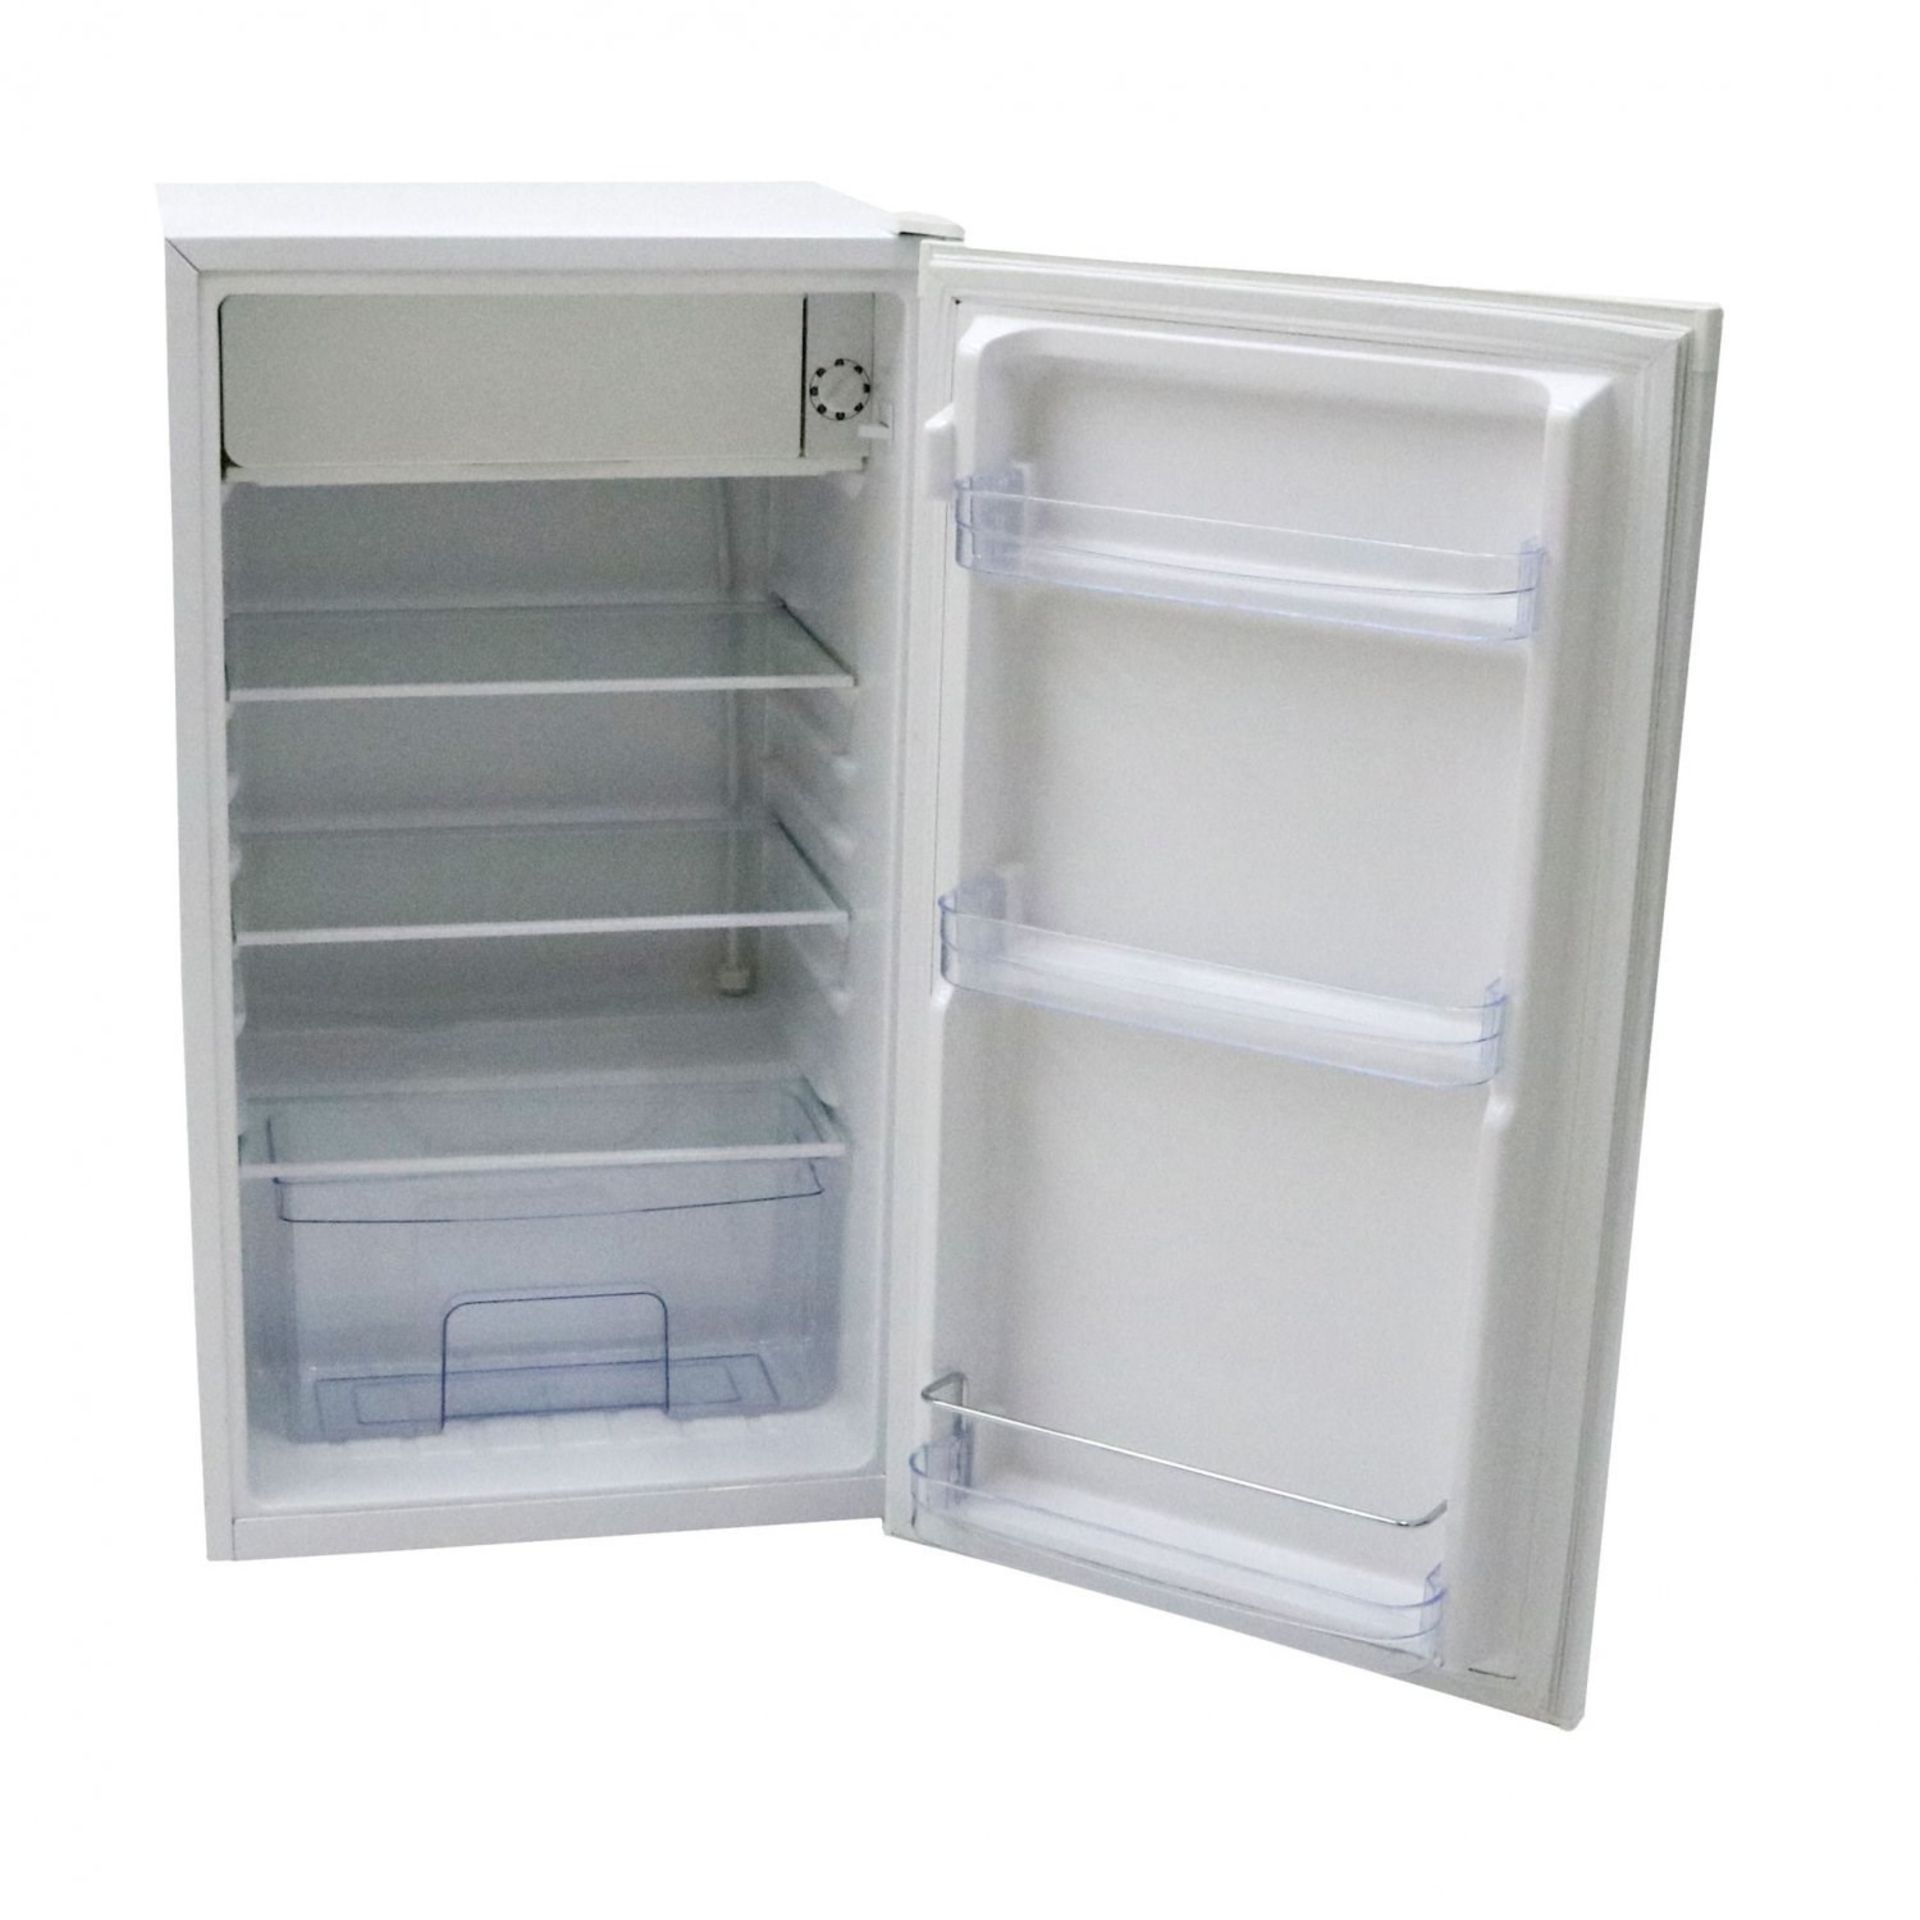 90L Undercounter Fridge. The under counter 90L fridge offers a space saving compact design wit... - Image 2 of 2